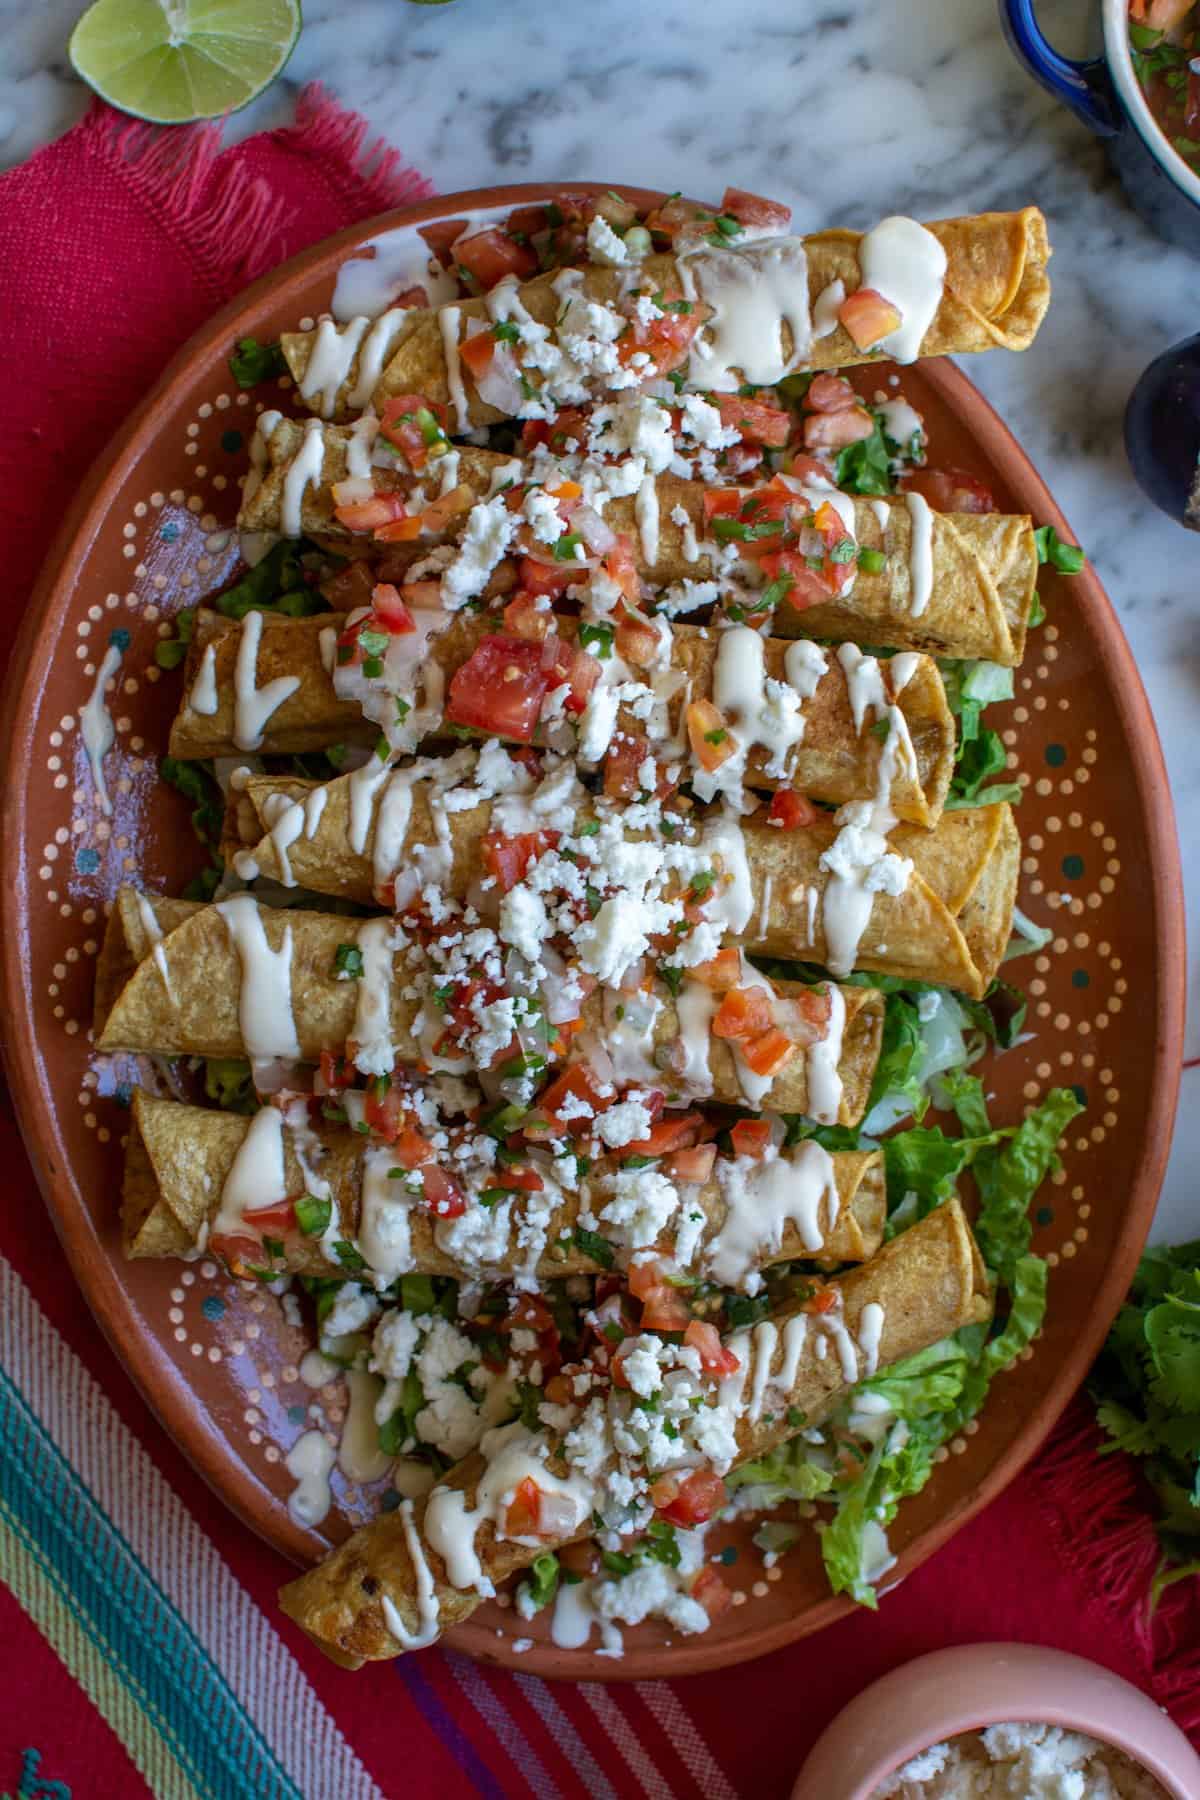 A terracotta plate of flautas Mexicanas topped with sour cream, Pico de Gallo, and queso fresco on a red tablecloth.